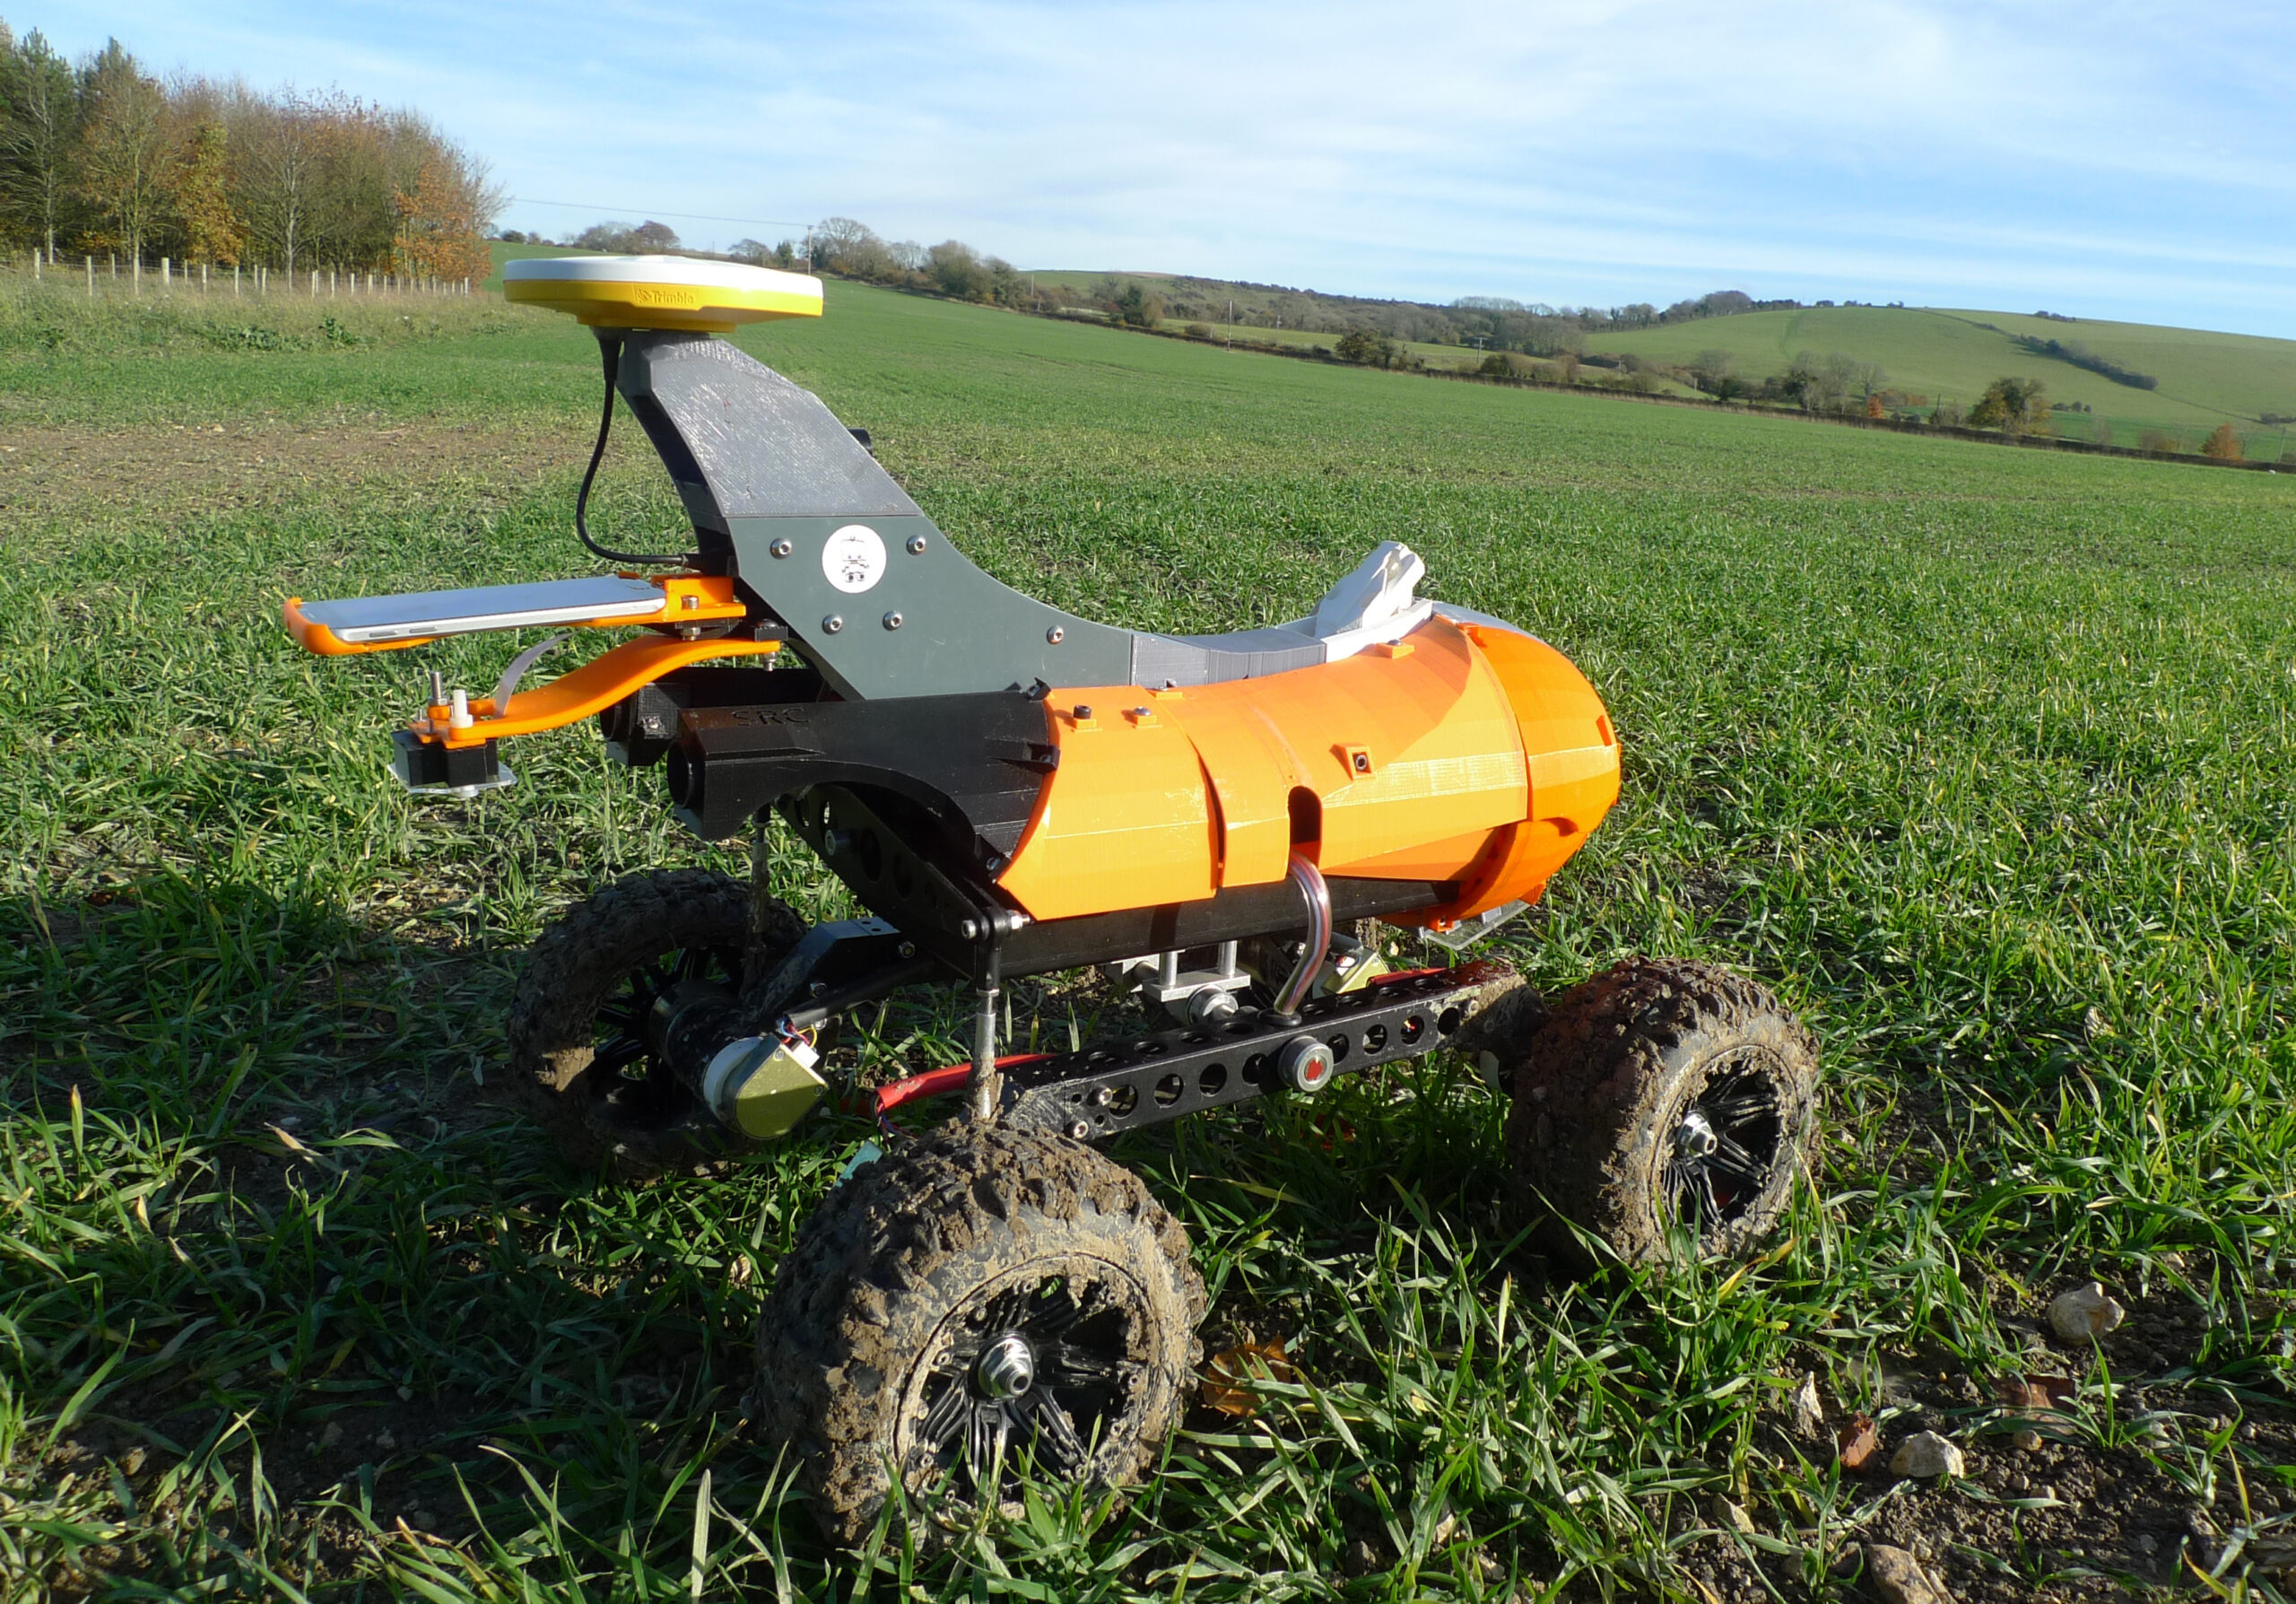 A farming robot designed to seed, weed and feed crops